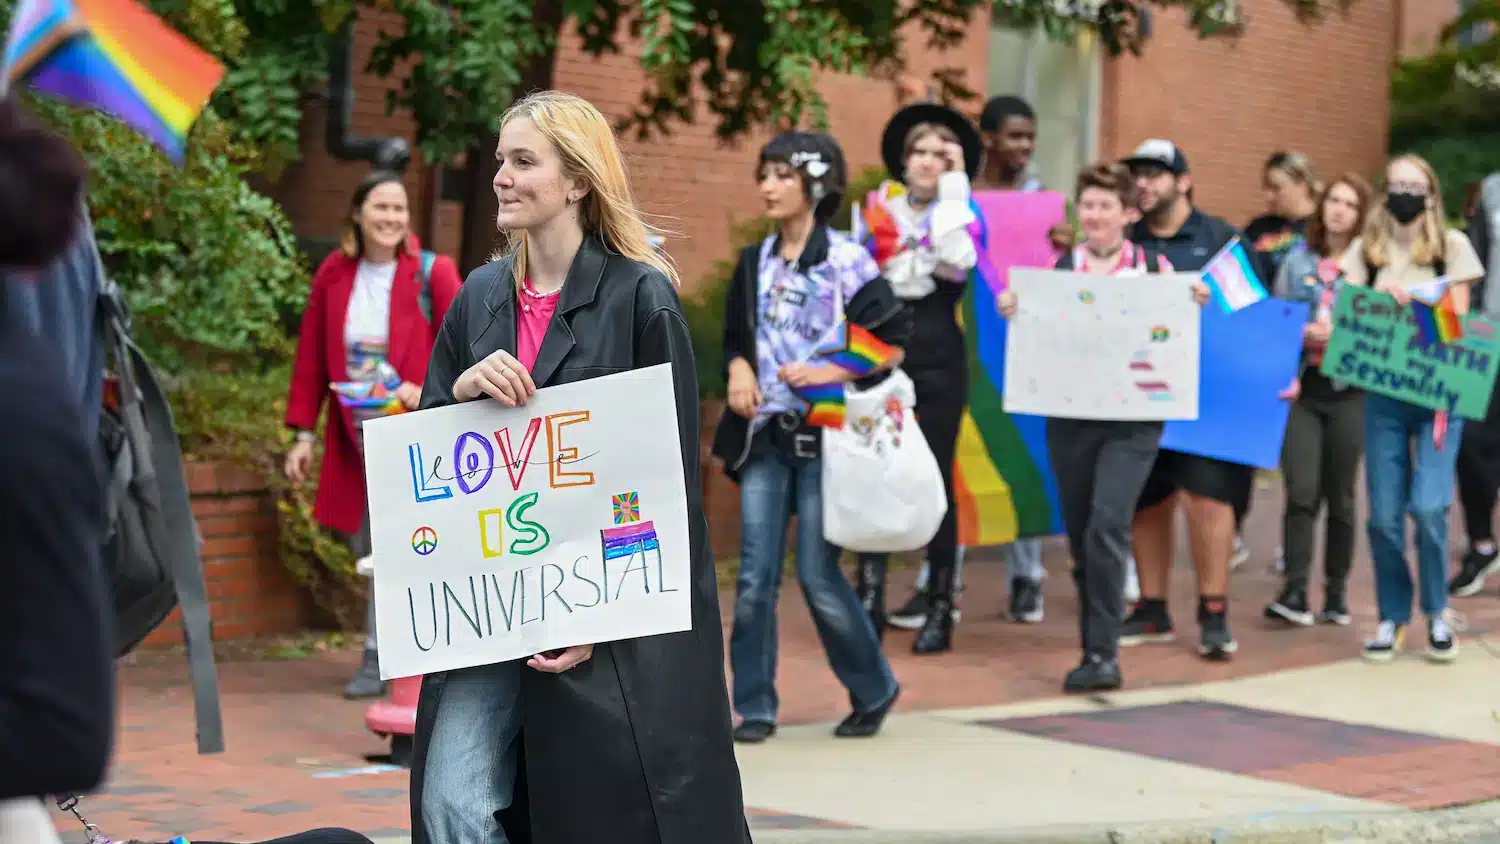 A student holds a sign that says "Love Is Universal" at NC State's 2022 Pride Walk event.